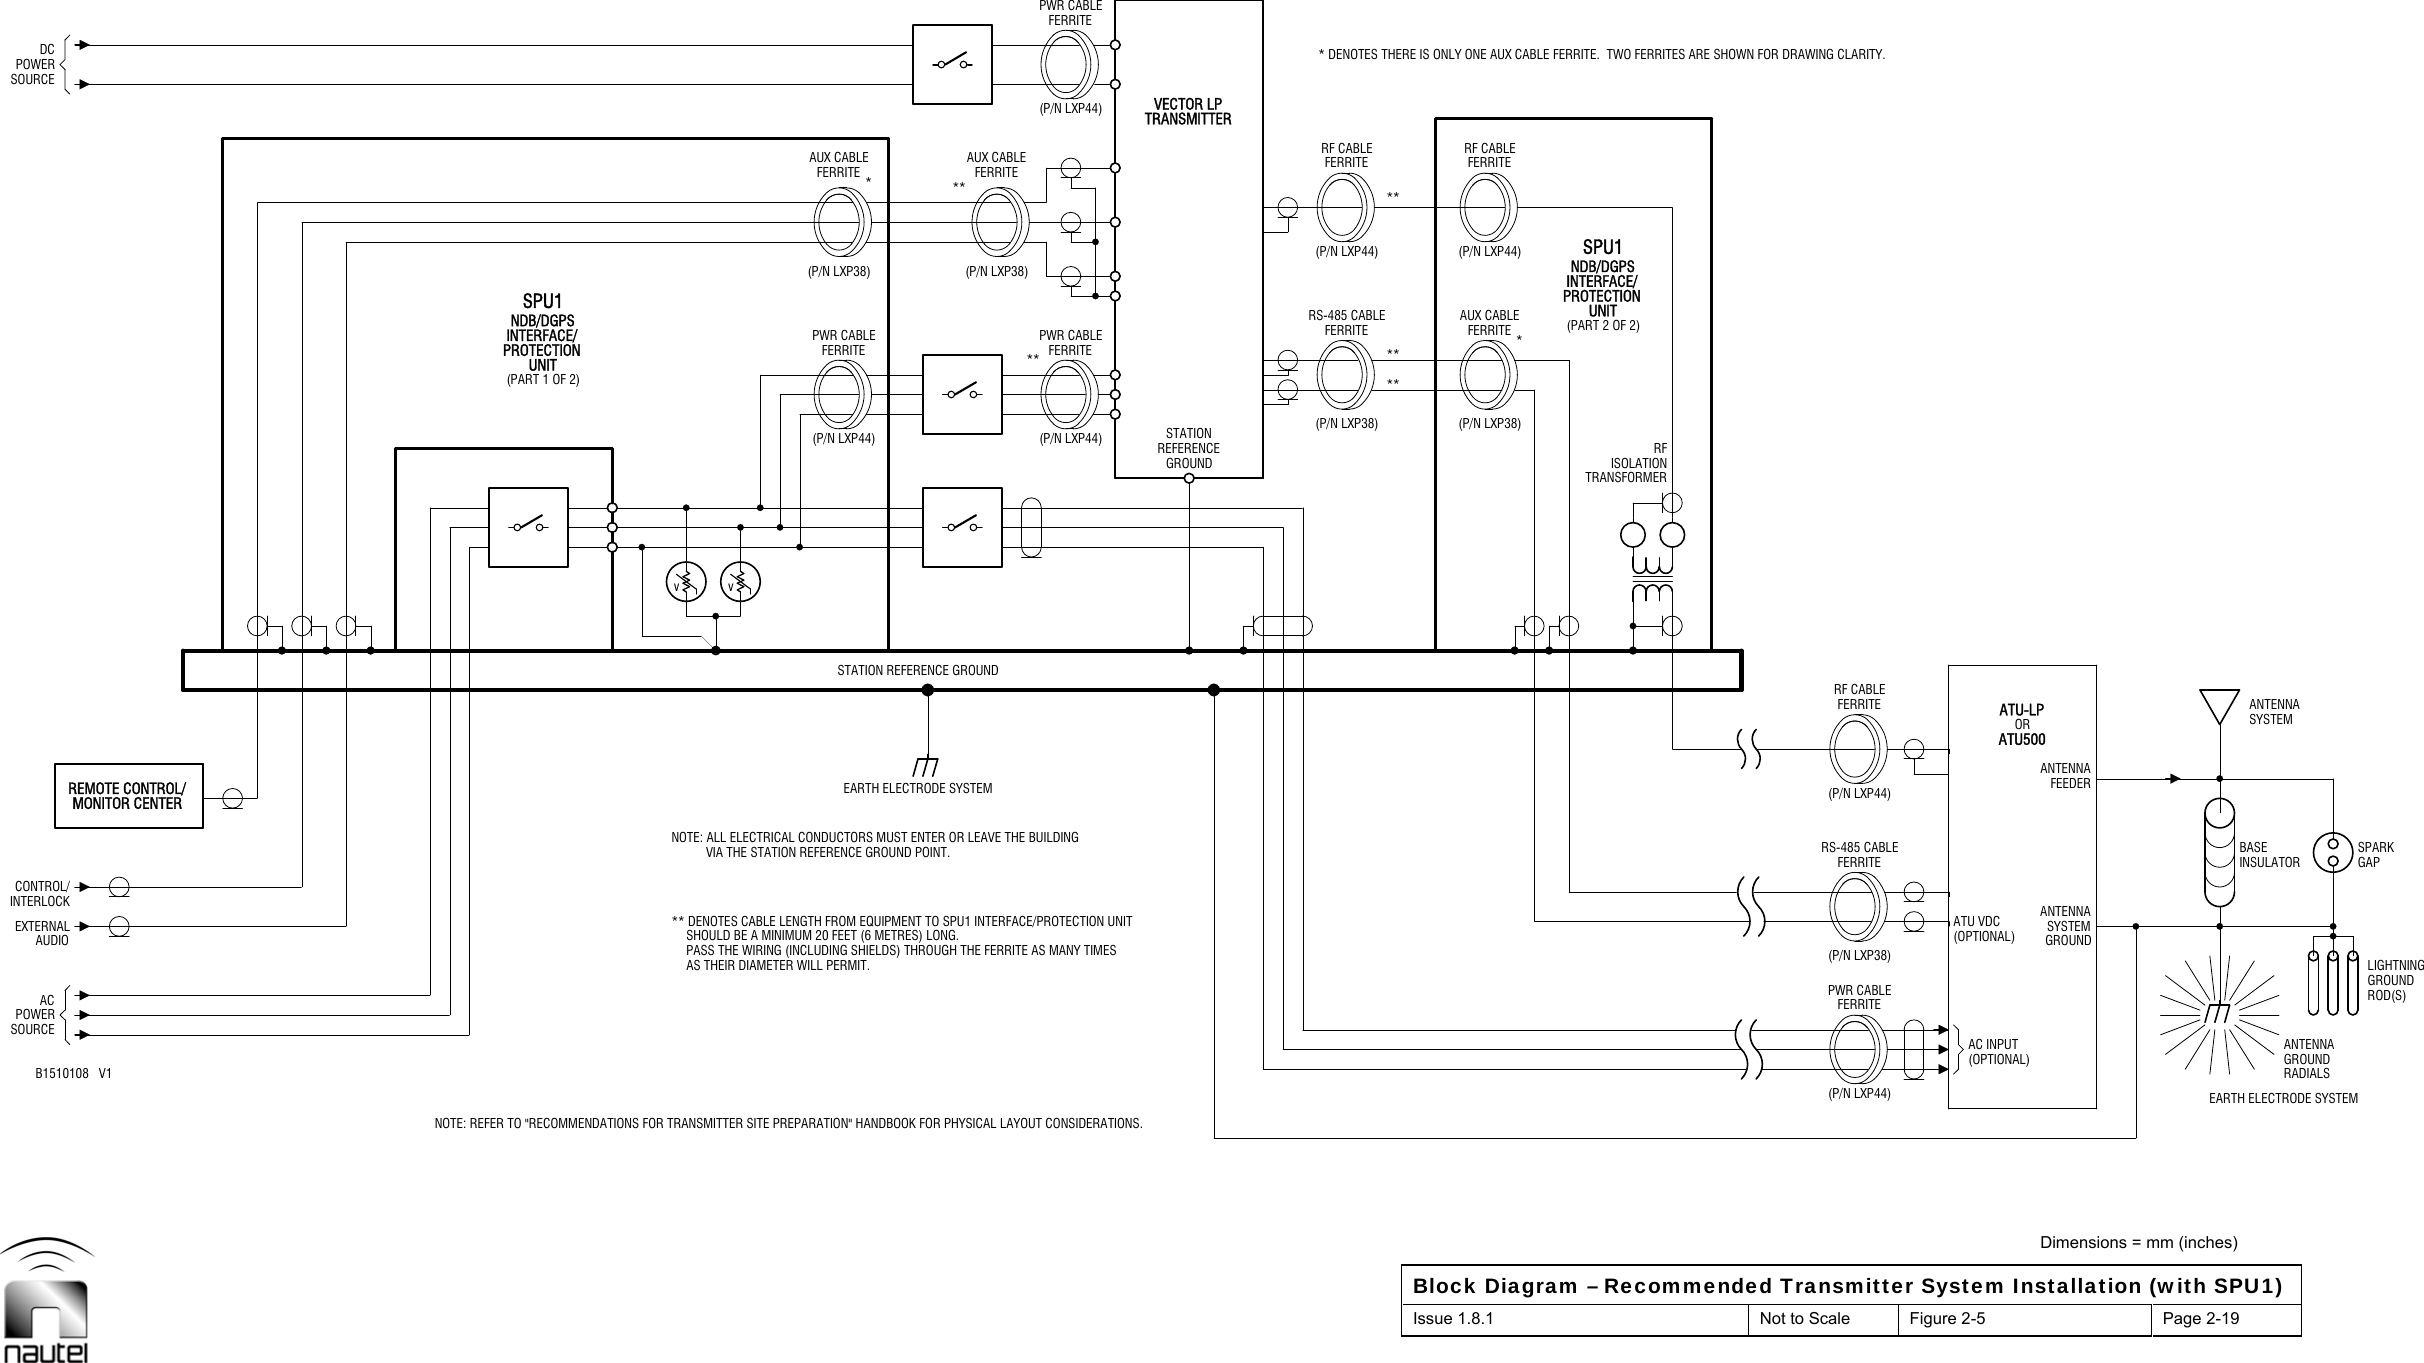  Dimensions = mm (inches) Block Diagram – Recommended Transmitter System Installation (with SPU1) Issue 1.8.1  Not to Scale  Figure 2-5  Page 2-19   DCFERRITE ******ORFEEDERGAPACAUDIOUNITSPU1v** **B1510108   V1POWERSOURCEEXTERNALCONTROL/SOURCE(PART 1 OF 2)NDB/DGPSINTERFACE/(P/N LXP44)PWR CABLE(P/N LXP38)**(P/N LXP44)PWR CABLEFERRITE(P/N LXP38)FERRITERF CABLE(P/N LXP38)FERRITEAUX CABLERF CABLEISOLATIONTRANSFORMERFERRITE(P/N LXP38)FERRITERF CABLESYSTEMANTENNAANTENNARADIALSGROUNDINSULATORSYSTEMINTERLOCKMONITOR CENTERREMOTE CONTROL/POWERPROTECTIONvFERRITEAUX CABLEFERRITE(P/N LXP44)PWR CABLE(P/N LXP44)FERRITE FERRITE(P/N LXP44)UNITRFSPU1(P/N LXP44)PWR CABLEFERRITERS-485 CABLE(P/N LXP44)GROUNDATU-LPATU500EARTH ELECTRODE SYSTEMANTENNAANTENNABASEEARTH ELECTRODE SYSTEMSTATION REFERENCE GROUNDGROUNDSTATIONRS-485 CABLE(P/N LXP38)FERRITE(OPTIONAL)ATU VDC(OPTIONAL)(PART 2 OF 2)INTERFACE/GROUNDLIGHTNINGVIA THE STATION REFERENCE GROUND POINT.REFERENCEAUX CABLEVECTOR LPTRANSMITTERAC INPUTPROTECTIONNDB/DGPSROD(S)SPARKNOTE: REFER TO &quot;RECOMMENDATIONS FOR TRANSMITTER SITE PREPARATION&quot; HANDBOOK FOR PHYSICAL LAYOUT CONSIDERATIONS.AS THEIR DIAMETER WILL PERMIT.SHOULD BE A MINIMUM 20 FEET (6 METRES) LONG.** DENOTES CABLE LENGTH FROM EQUIPMENT TO SPU1 INTERFACE/PROTECTION UNITNOTE: ALL ELECTRICAL CONDUCTORS MUST ENTER OR LEAVE THE BUILDINGPASS THE WIRING (INCLUDING SHIELDS) THROUGH THE FERRITE AS MANY TIMES* DENOTES THERE IS ONLY ONE AUX CABLE FERRITE.  TWO FERRITES ARE SHOWN FOR DRAWING CLARITY.